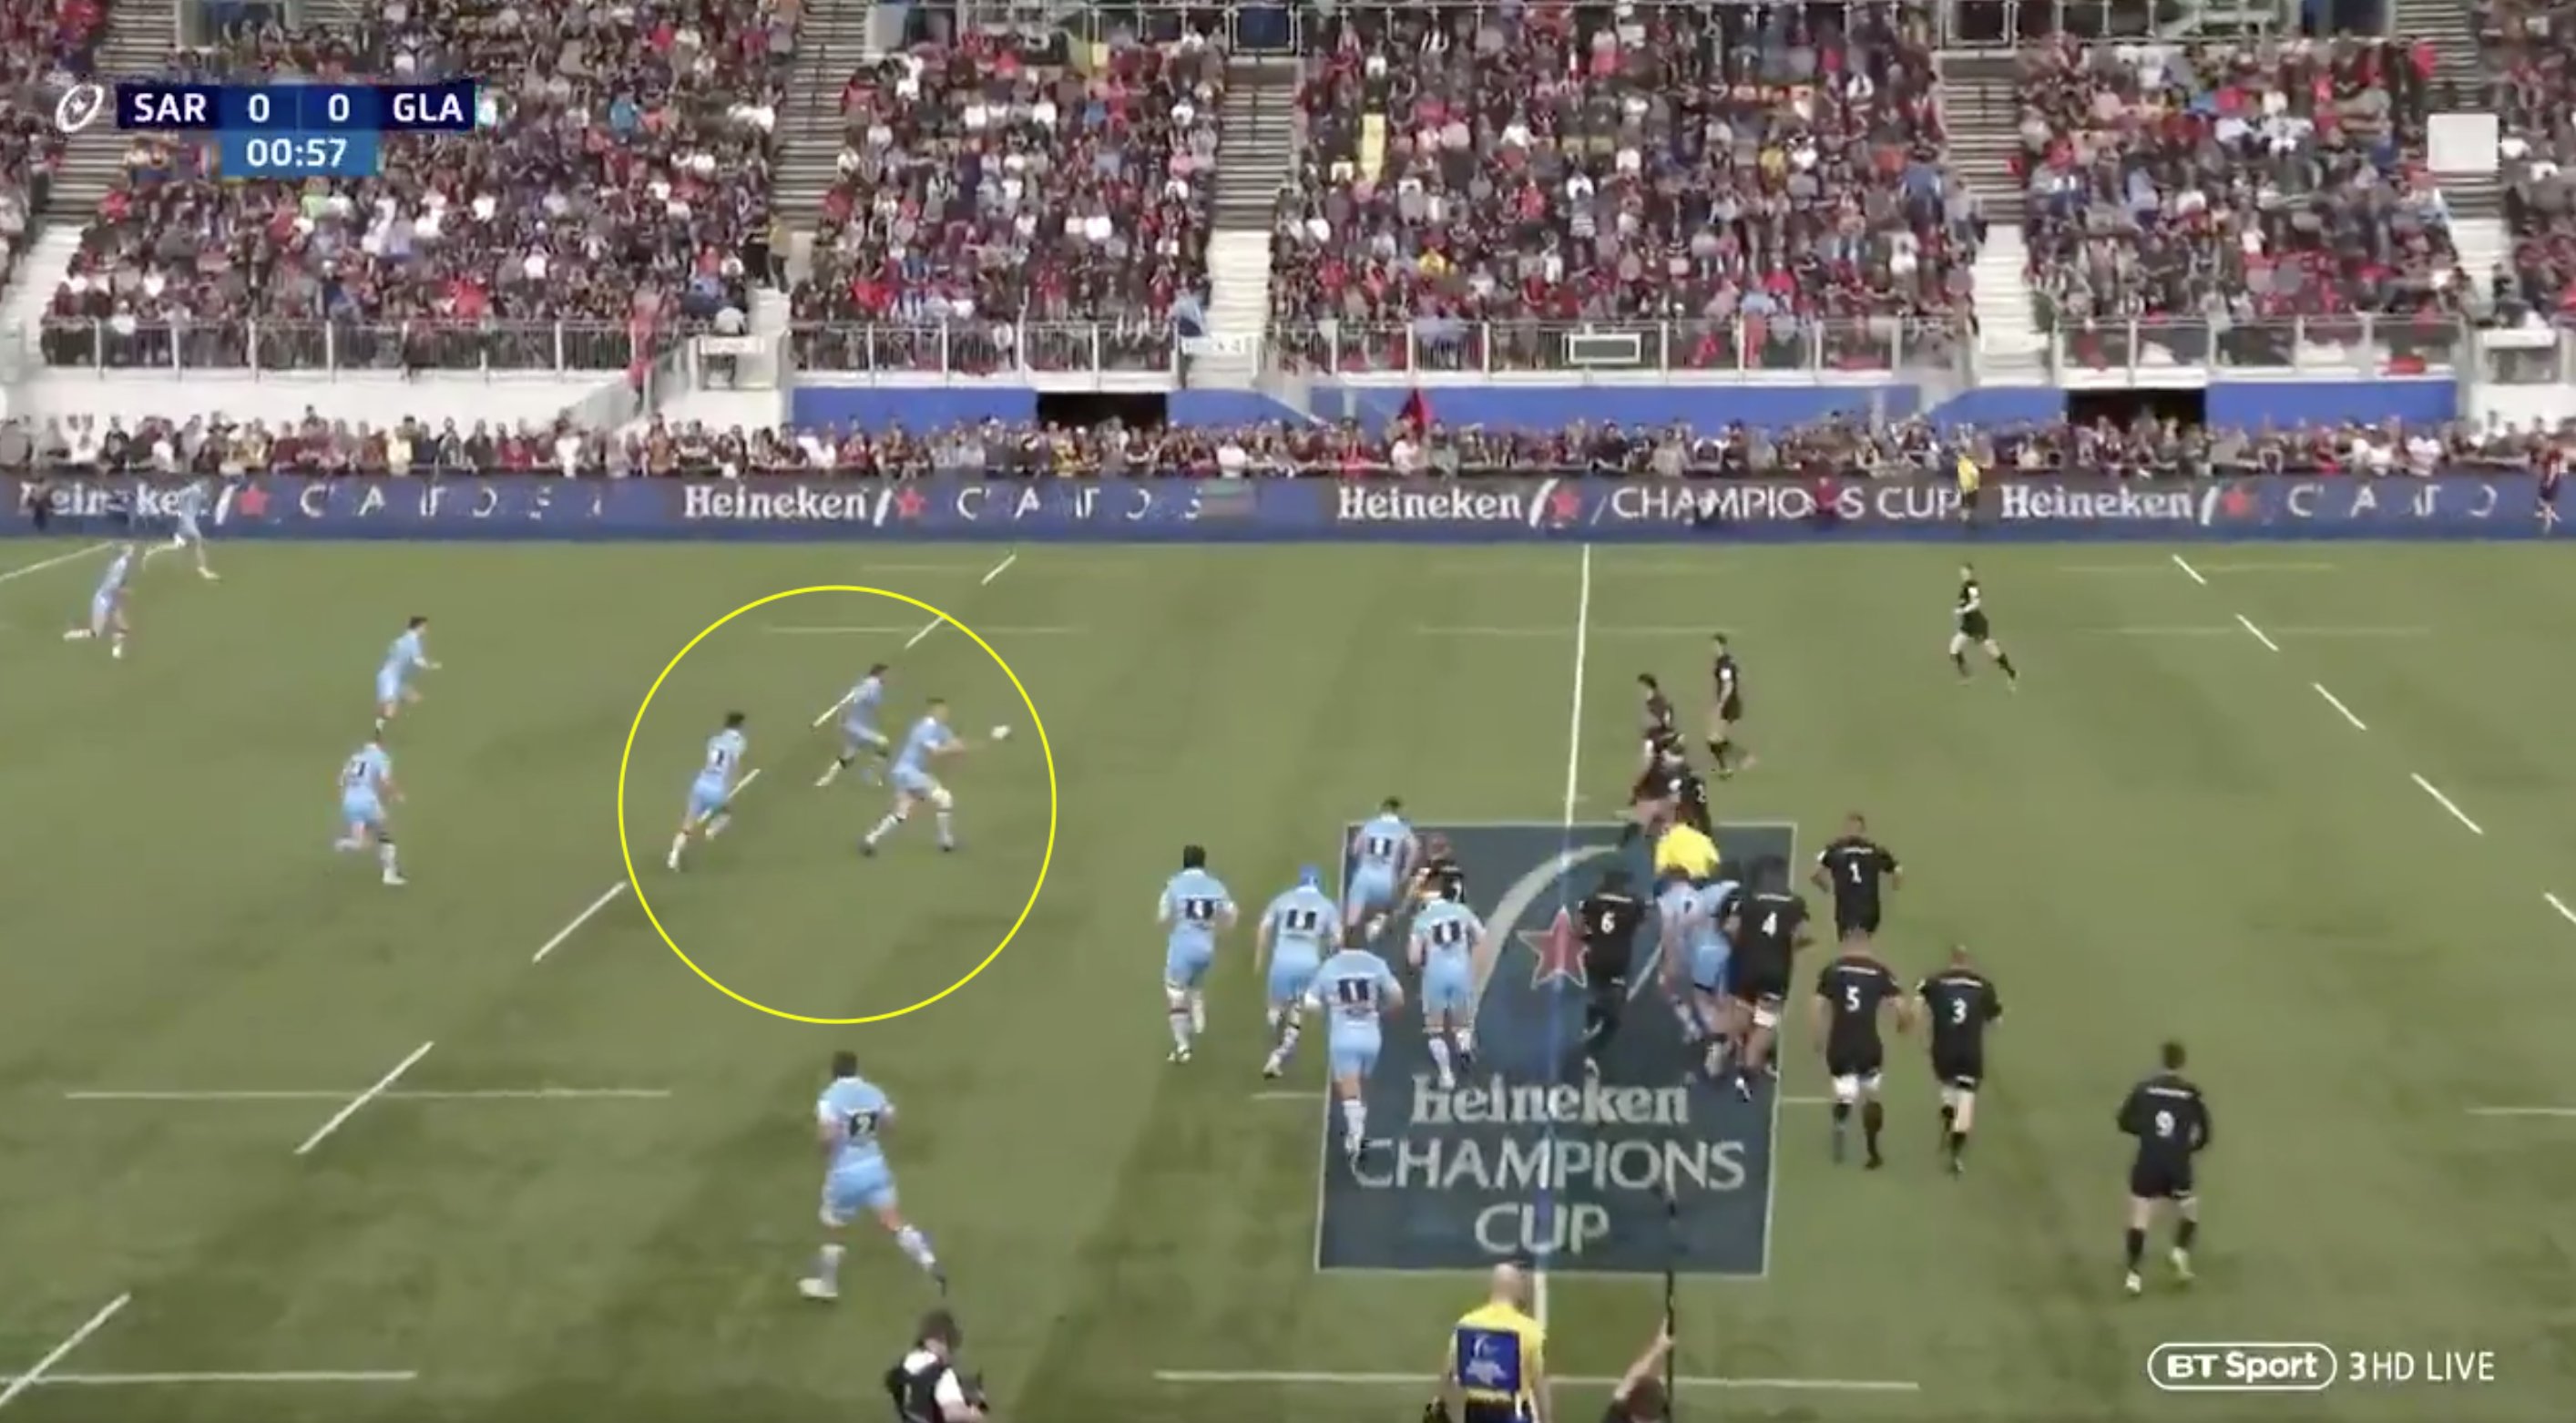 WATCH: Glasgow completely stun Saracens' defence with blistering attack in opening 2 minutes